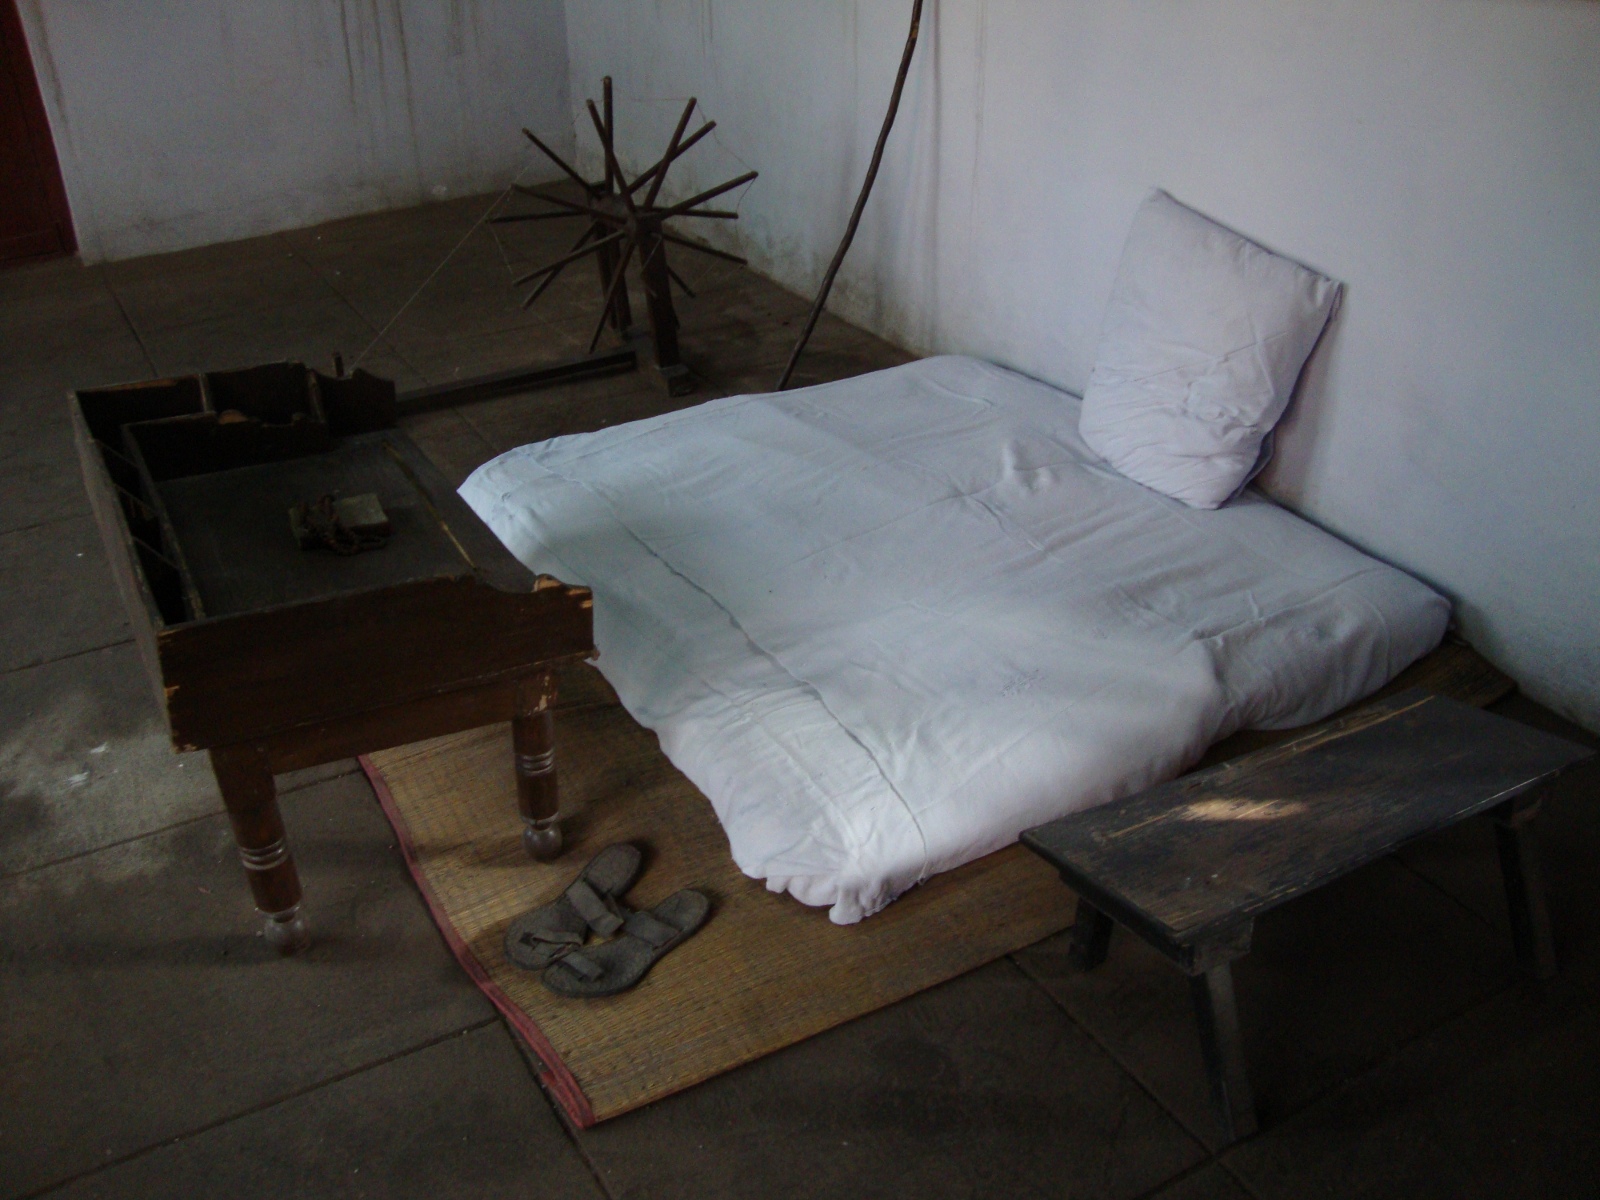 The reconstruction of Gandhi's room at the National Gandhi Museum, New Delhi.